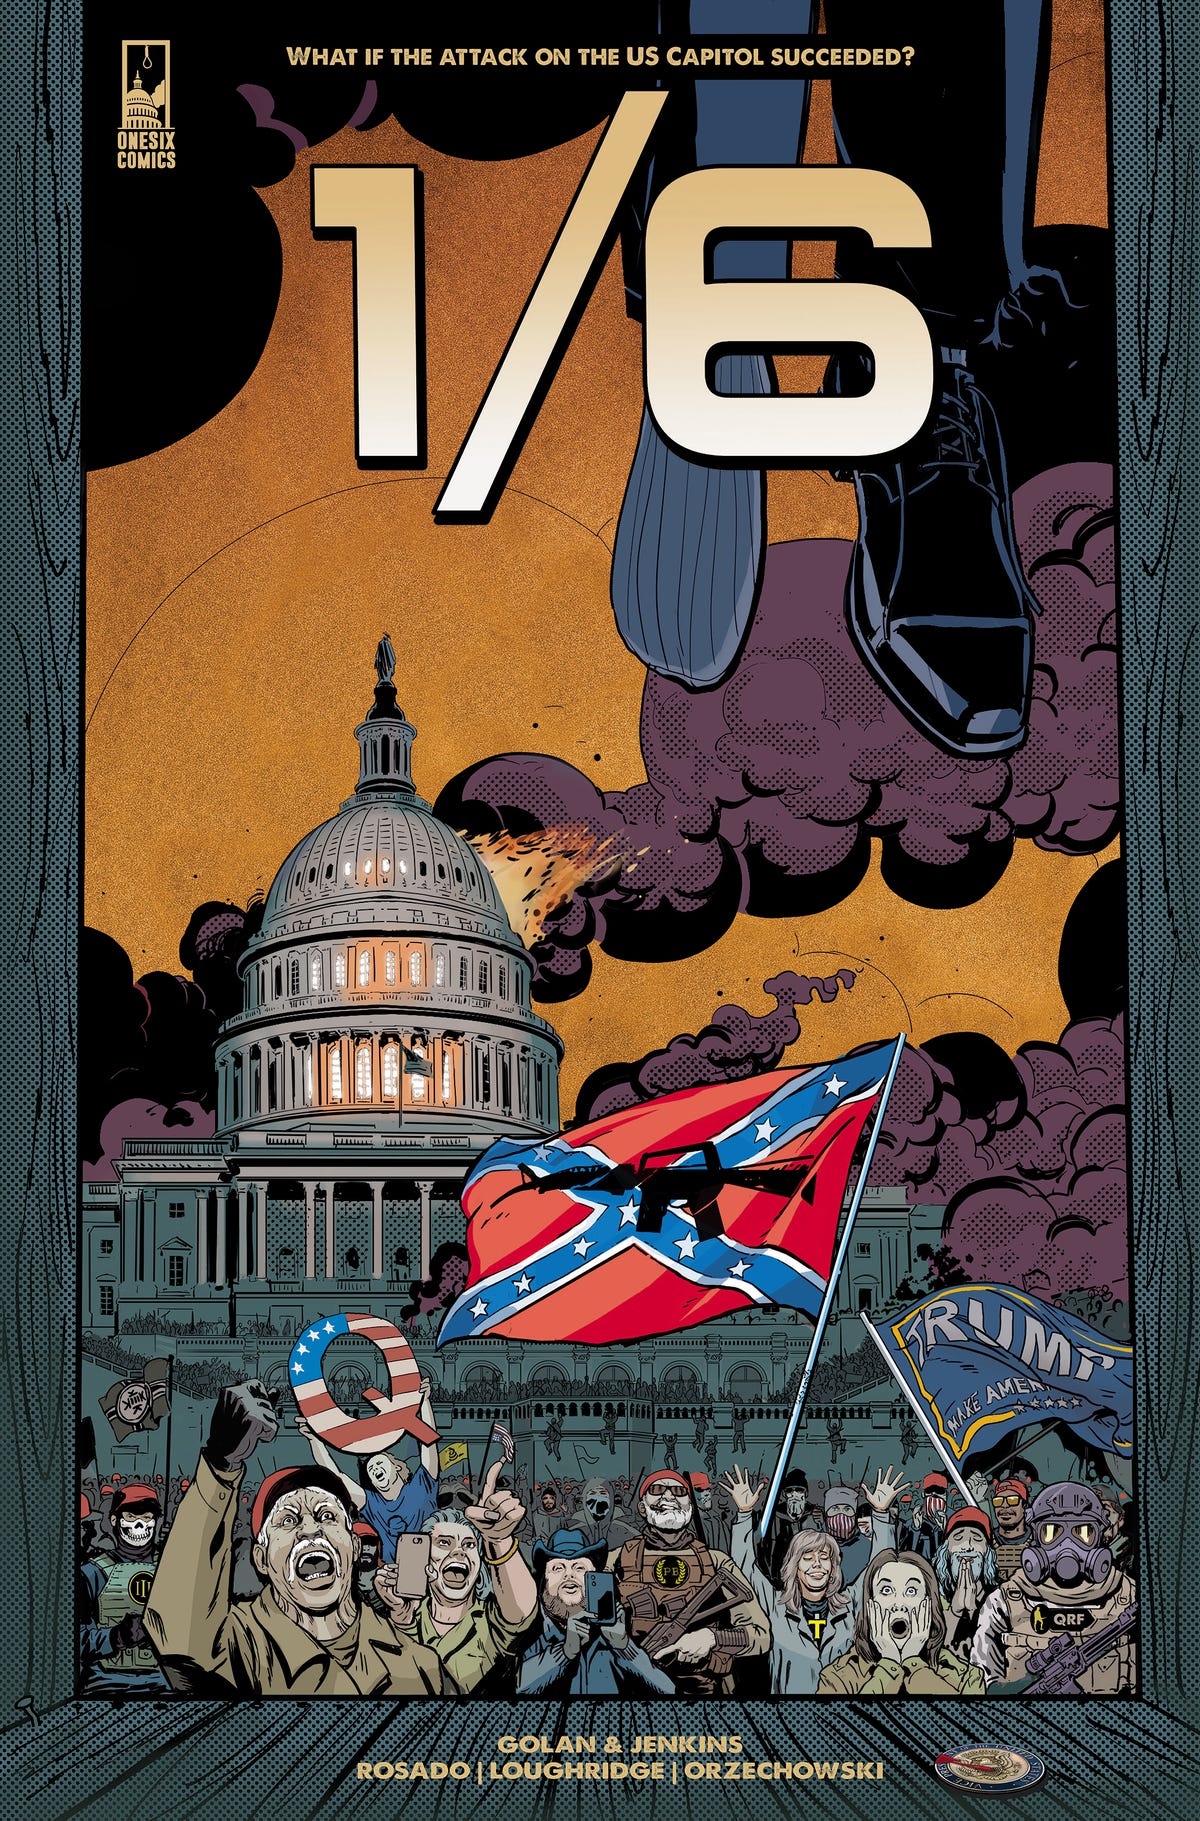 Cover of the graphic novel 1/6 show rioters at the US Capitol waving a Confederate flag